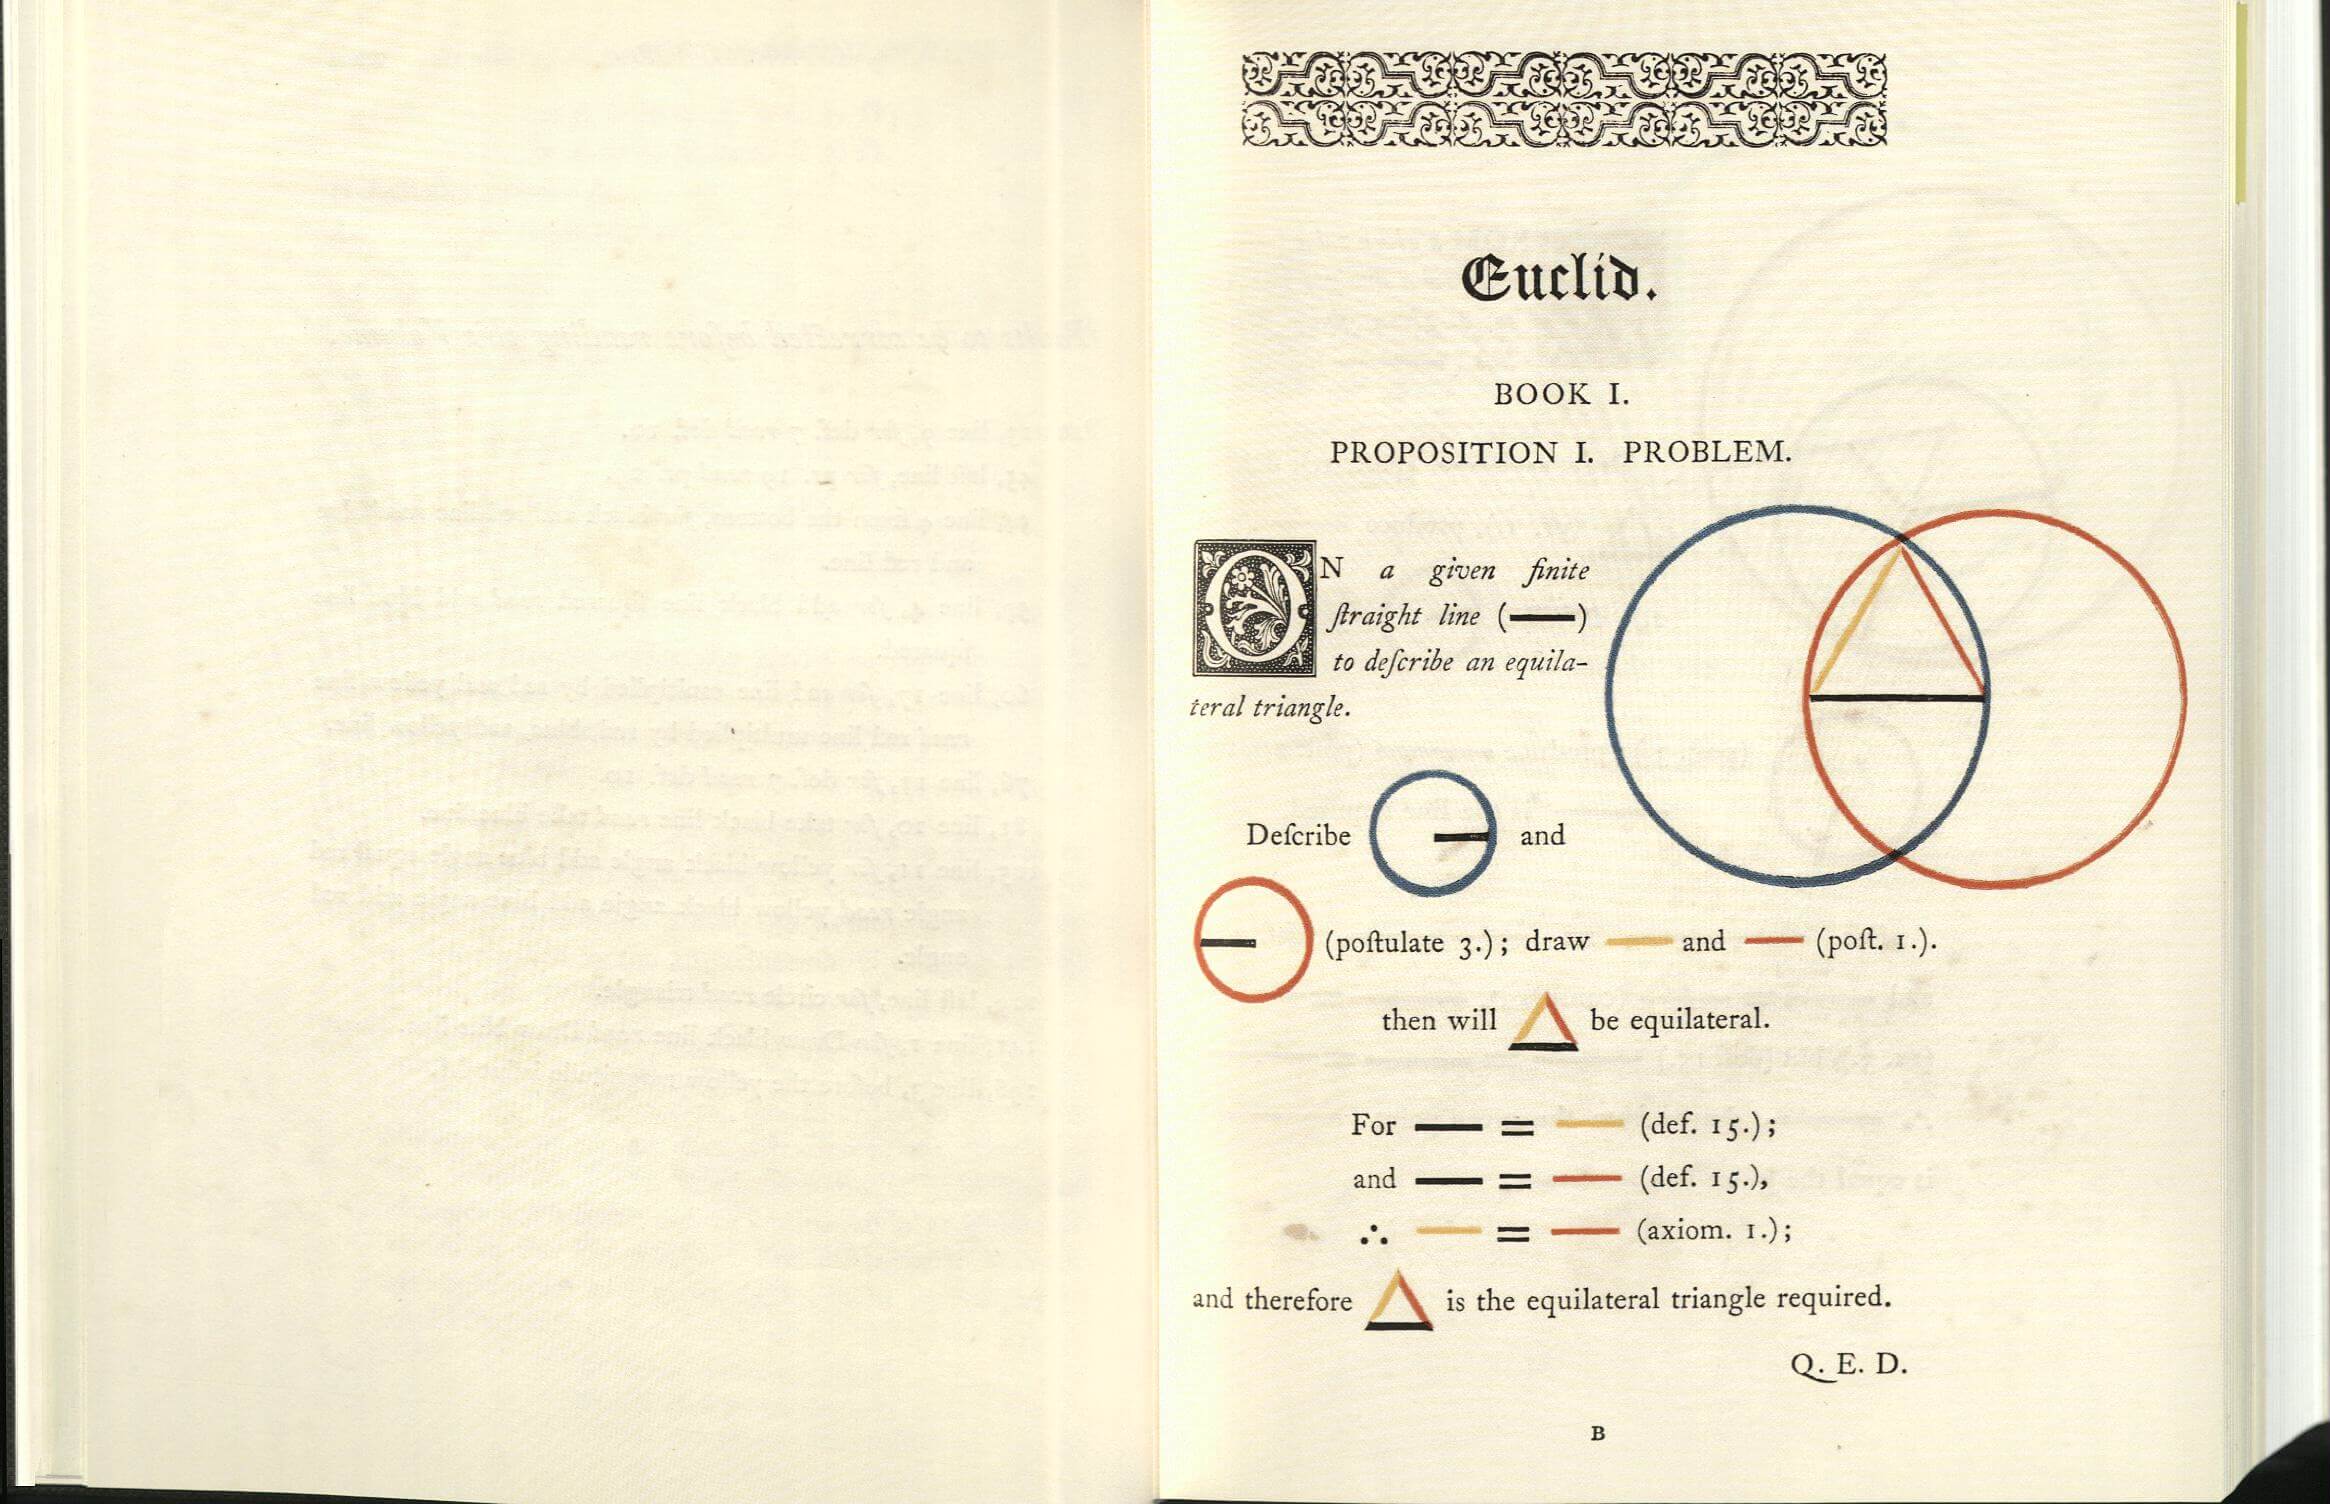 The Elements of Euclid (Euklid), The first six Books. Faksimile des Originals von 1847.